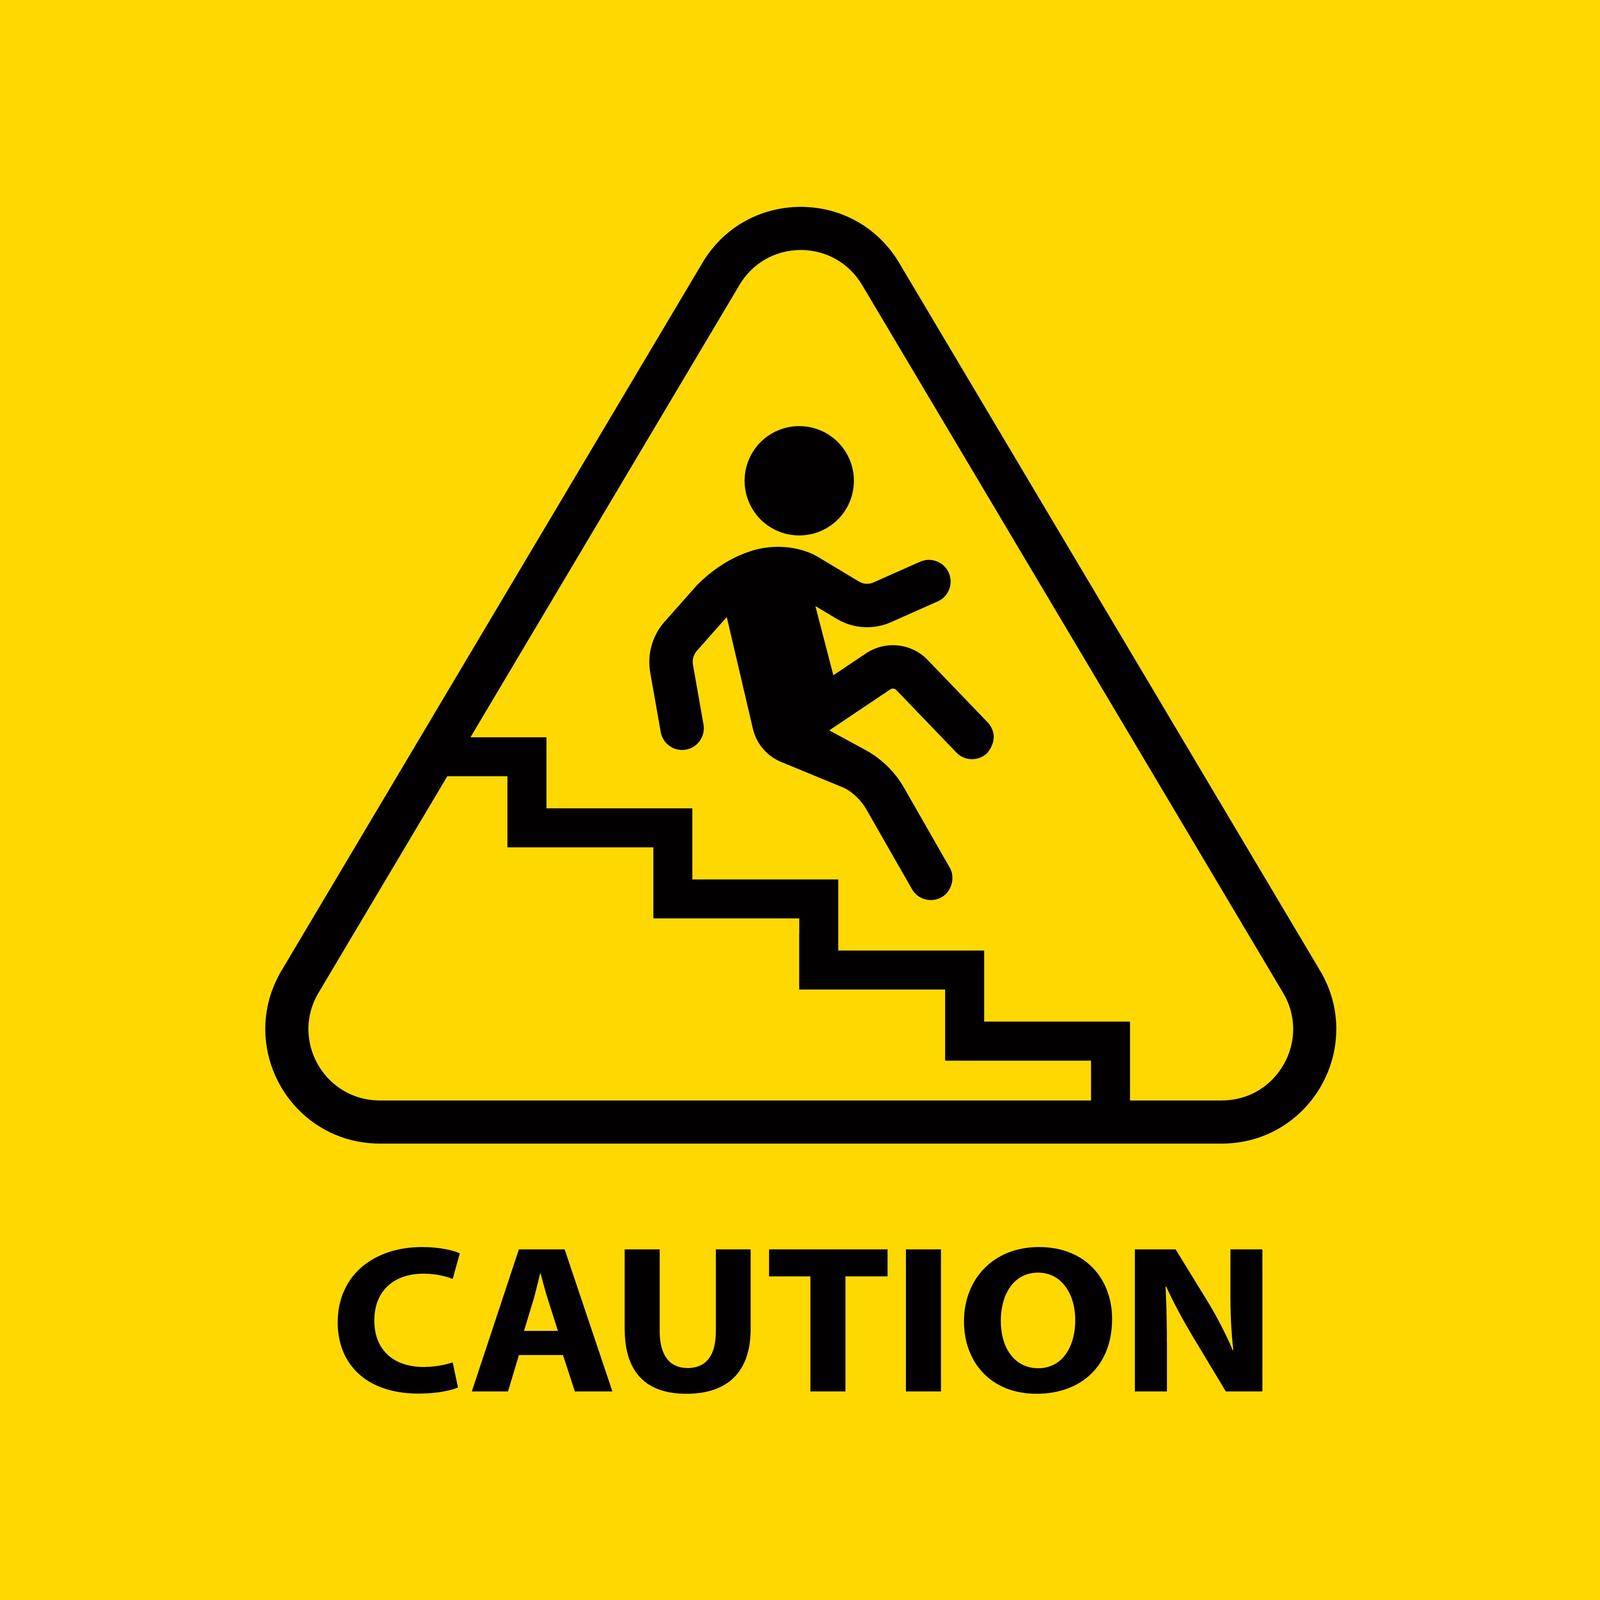 poster be careful on the stairs. fall off the stairs. flat vector illustration.